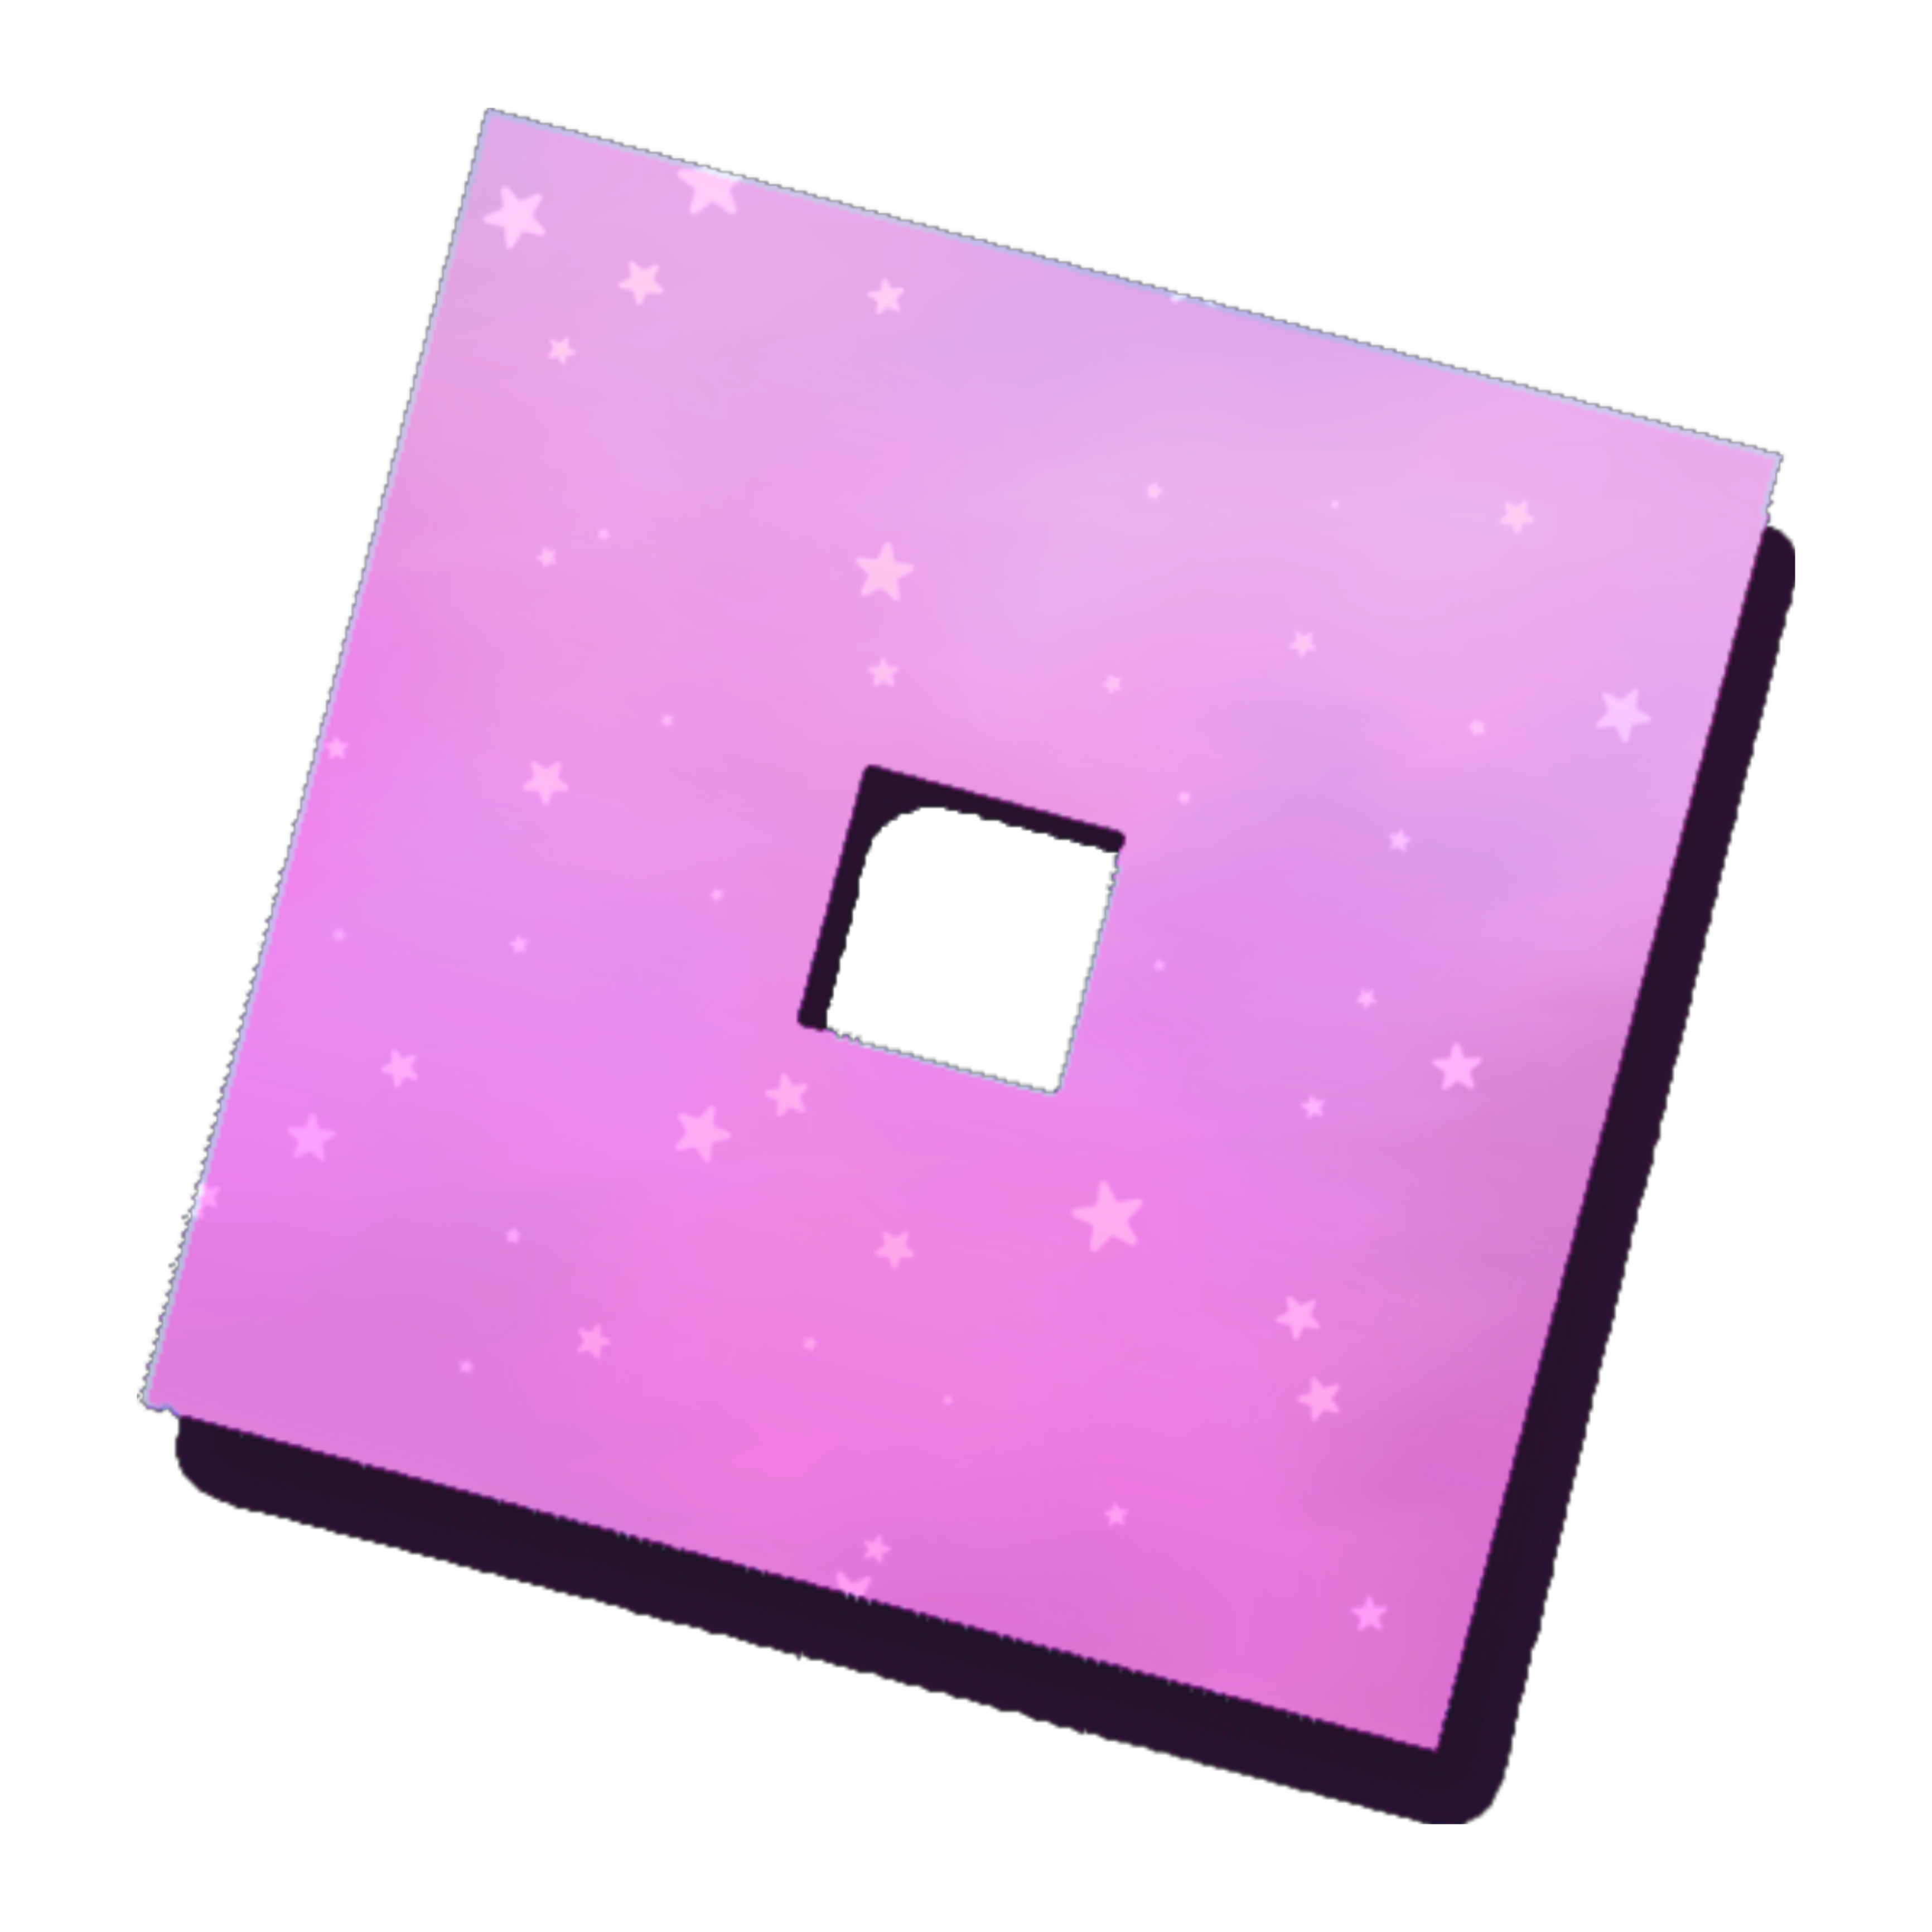 Roblox Pink Logo Galaxy Sticker By Twosetter F4f - pin by rosie sky on roblox avatars roblox pictures games roblox roblox roblox